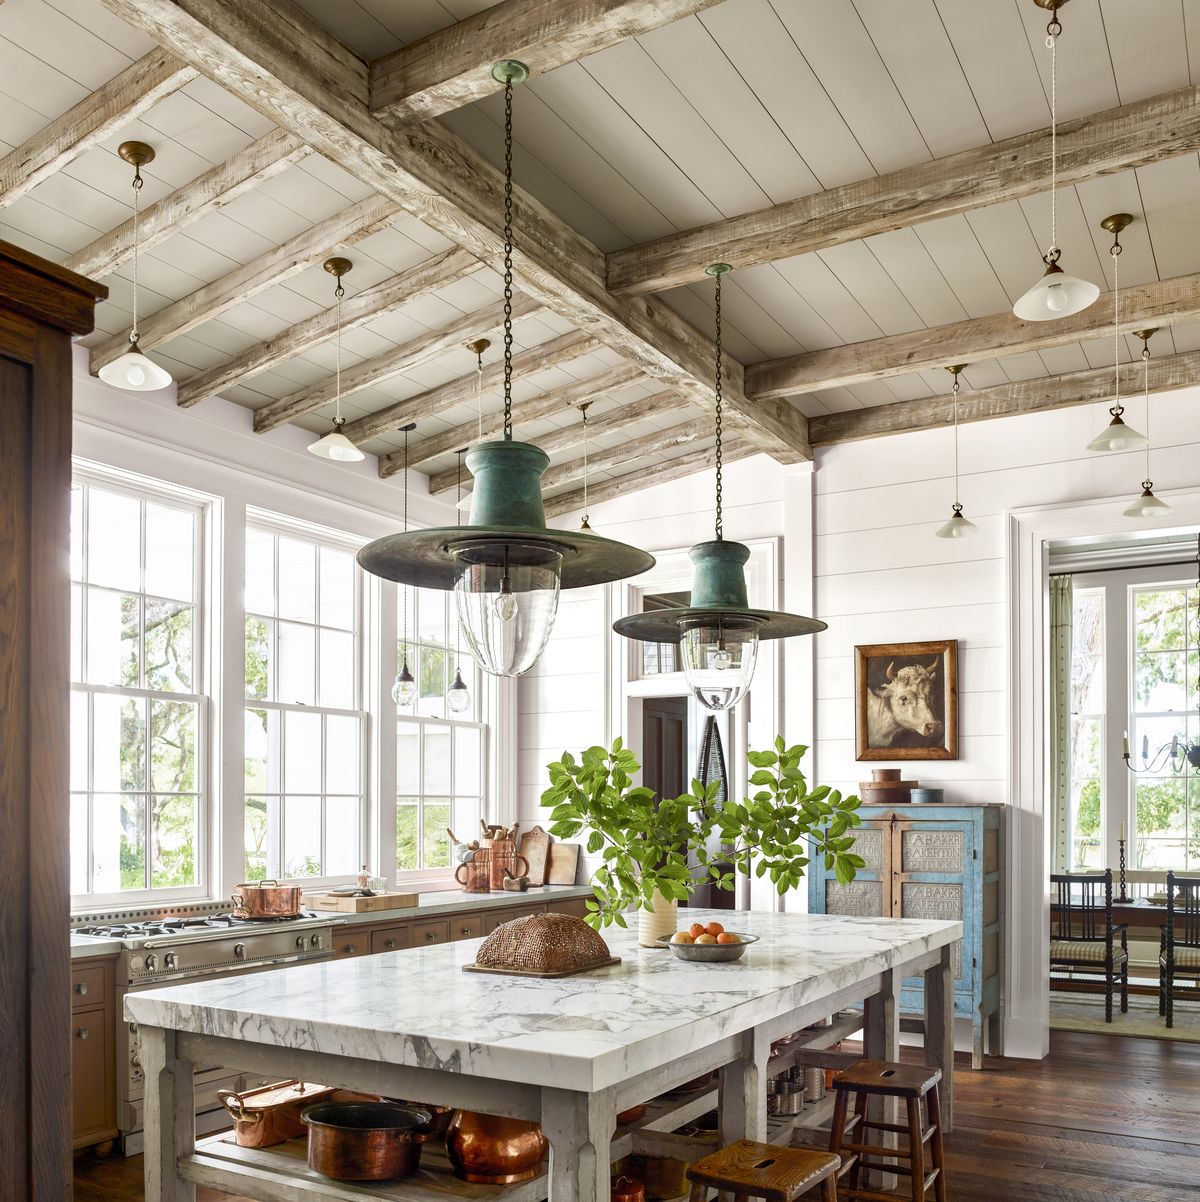 https://hips.hearstapps.com/hmg-prod/images/historical-concepts-farmhouse-kitchen-1613099124.jpg?crop=1.00xw:0.740xh;0,0.205xh&resize=1200:*